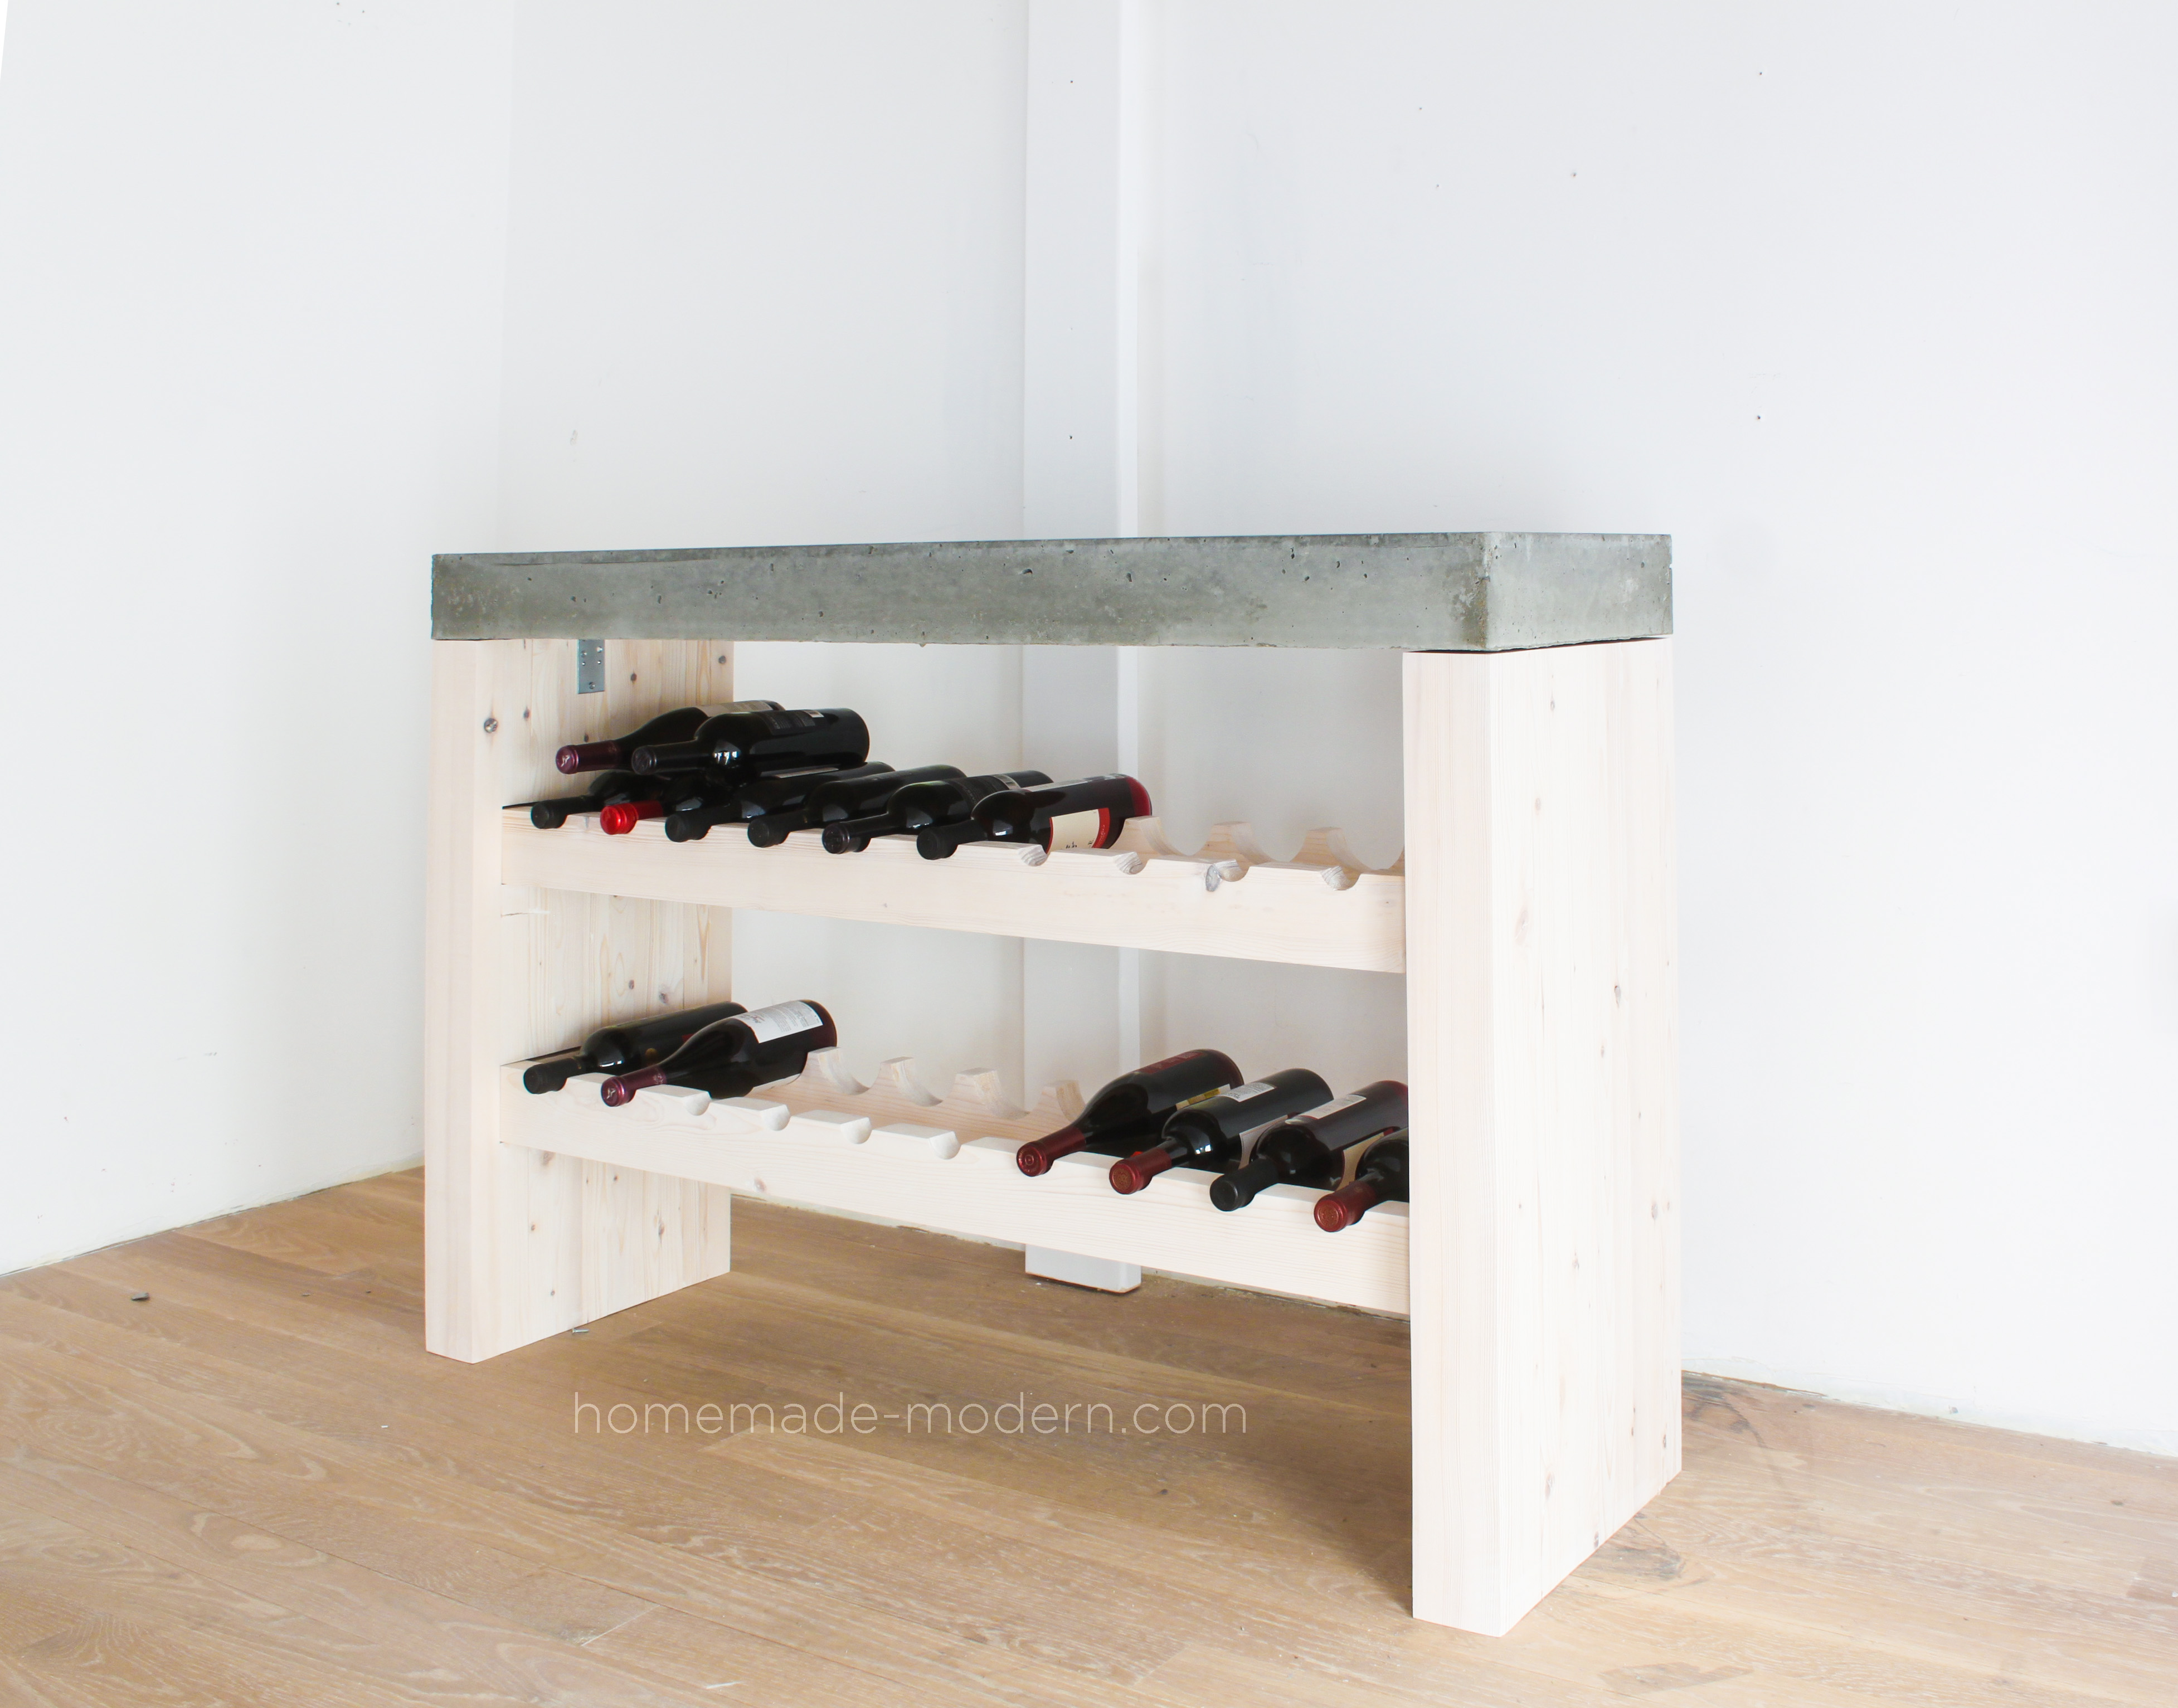 This DIY Wine Bar is made out of 2x4s and Quikrete 5000 concrete mix from Home Depot. Full instructions can be found at HomeMade-Modern.com